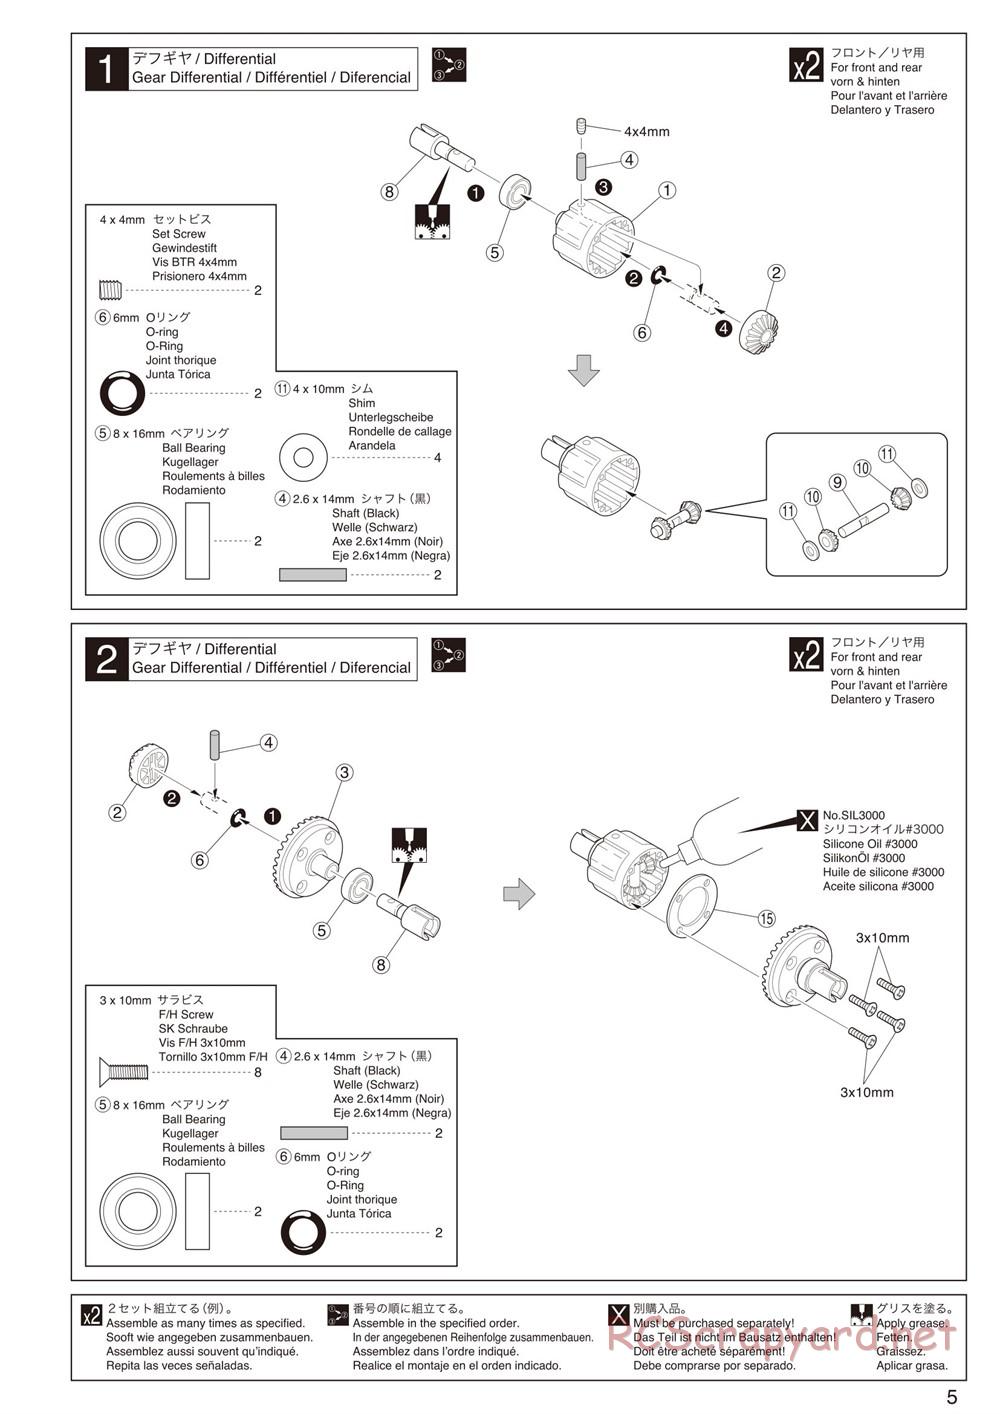 Kyosho - Mad Force Cruiser - Manual - Page 5